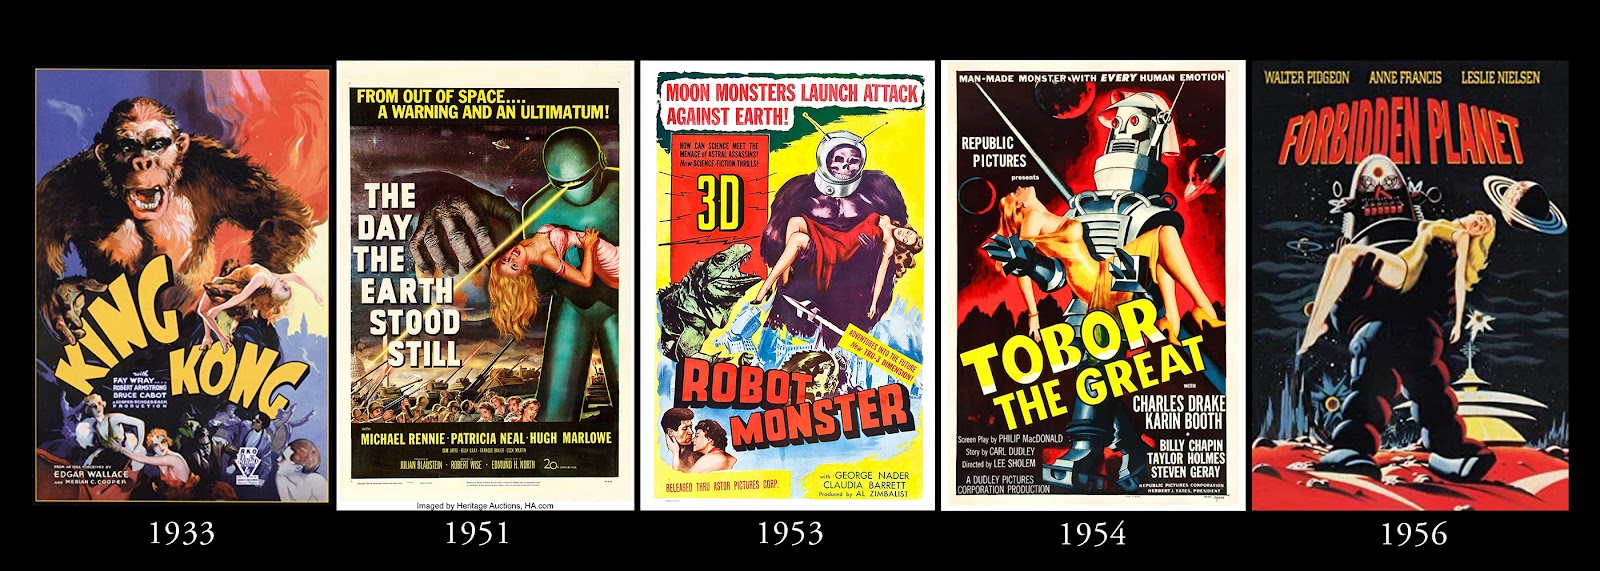 A comparison of poster imagery of movies post-King Kong. They all feature damsels in distress being held by large beasts of robots.